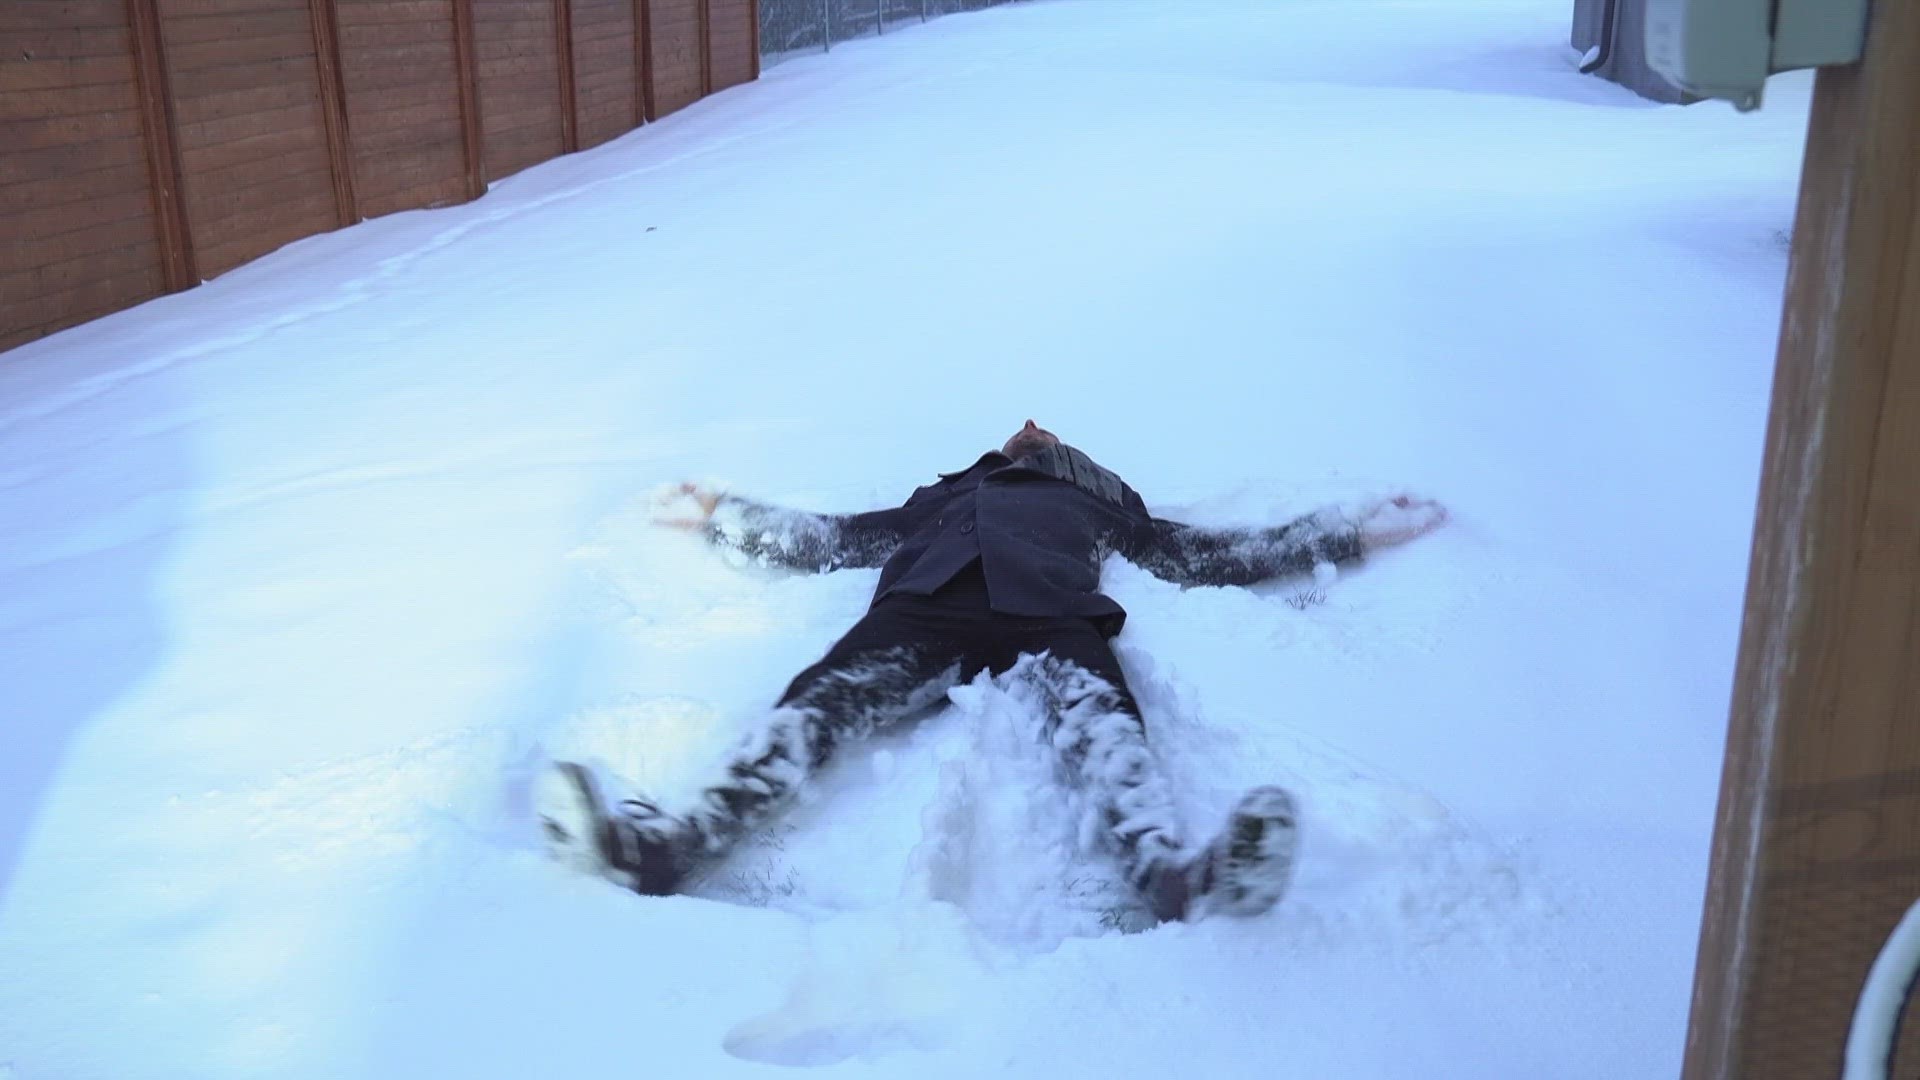 KREM 2's Chief Meteorologist has never made a snow angel, so we're filming his first attempt on KREM 2 News at 4!